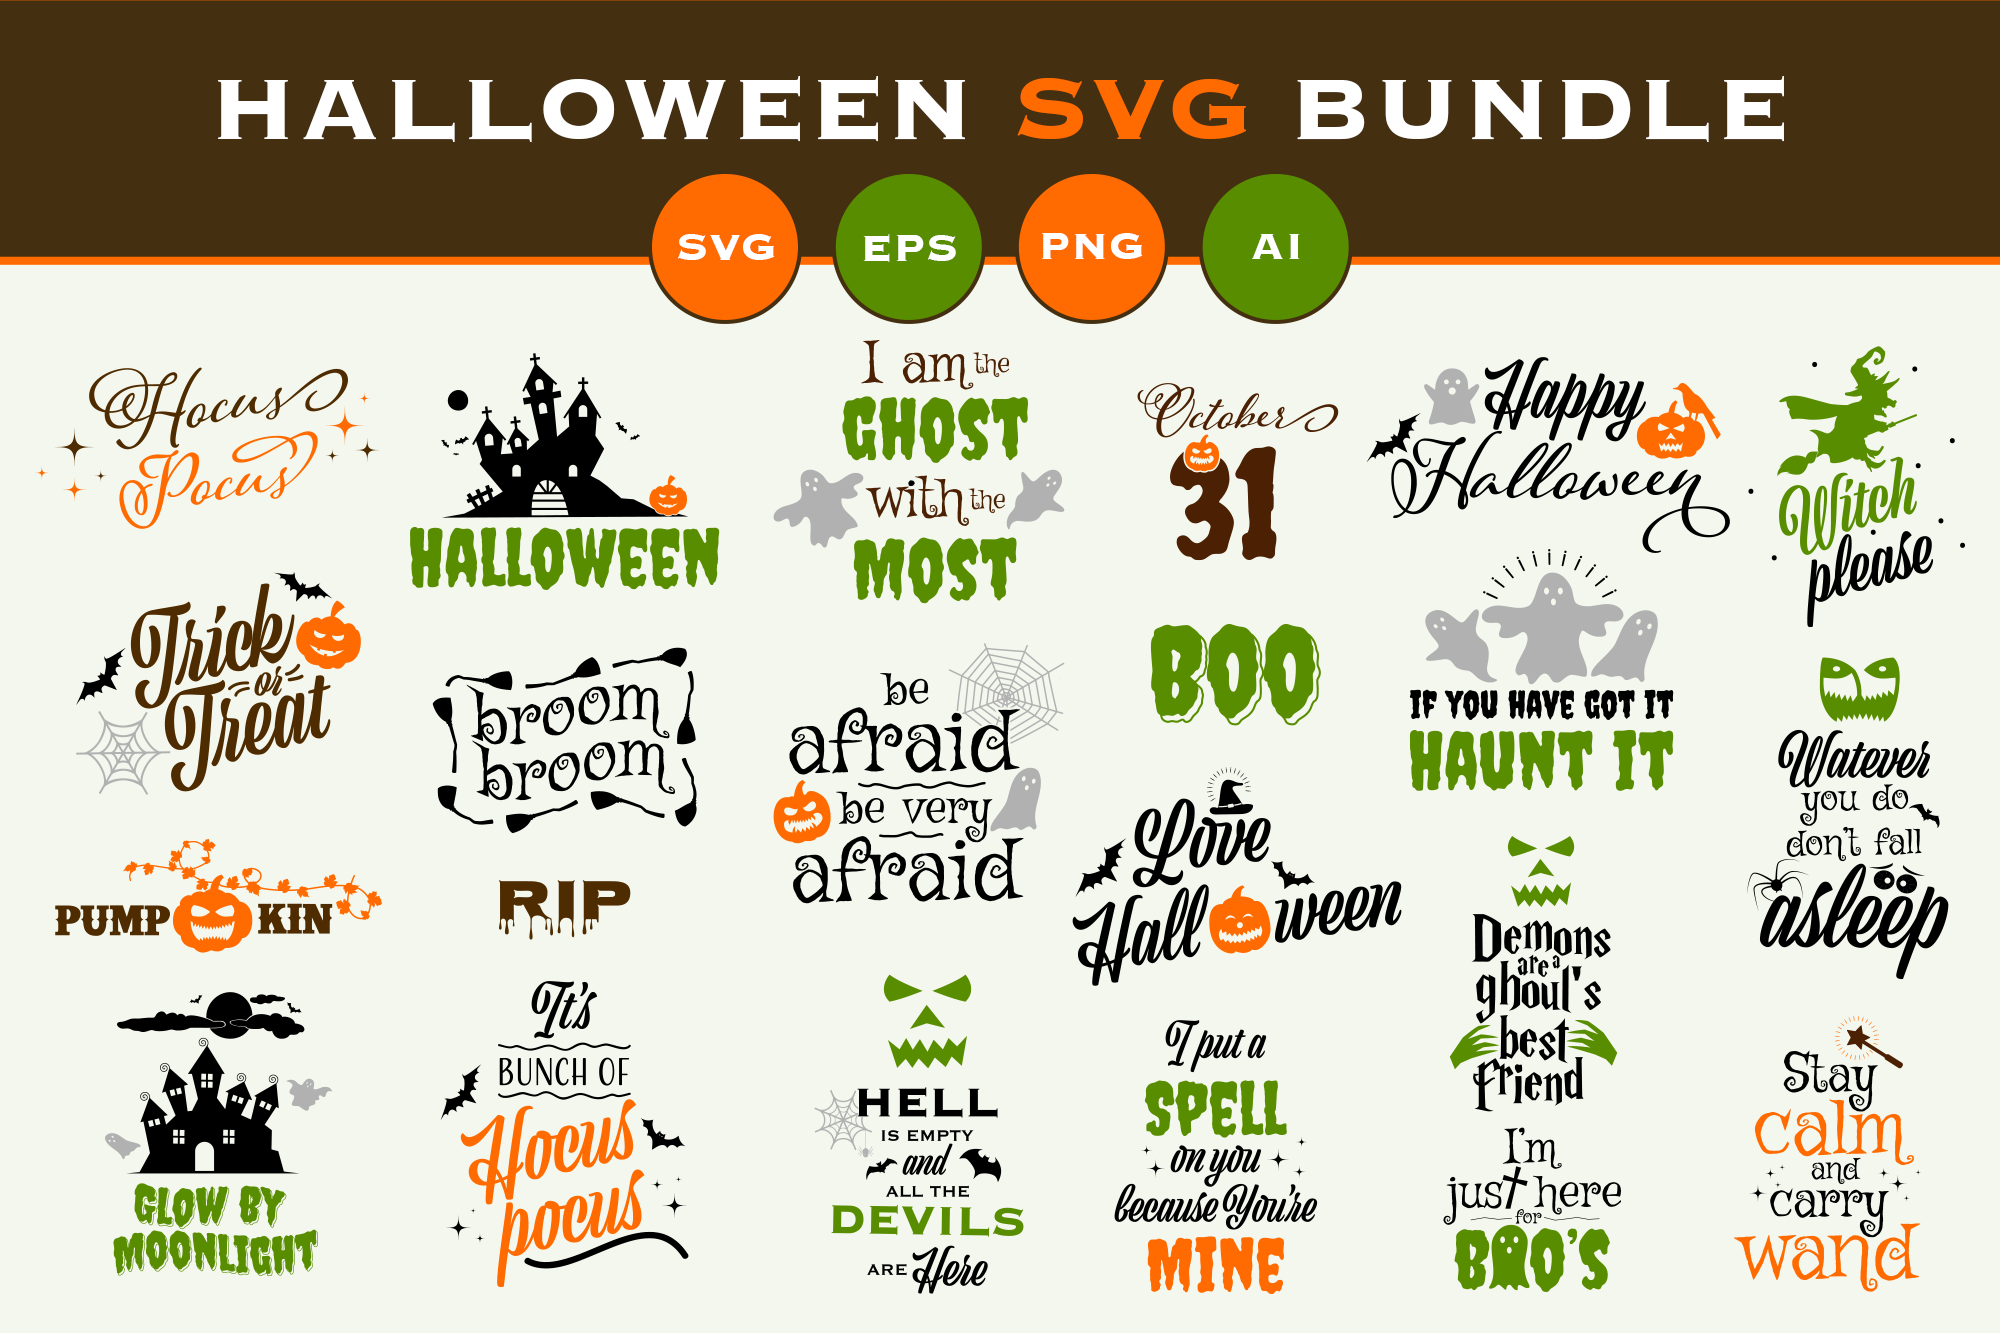 Download Halloween Svgs Free Free Svg Cut Files Create Your Diy Projects Using Your Cricut Explore Silhouette And More The Free Cut Files Include Svg Dxf Eps And Png Files PSD Mockup Templates